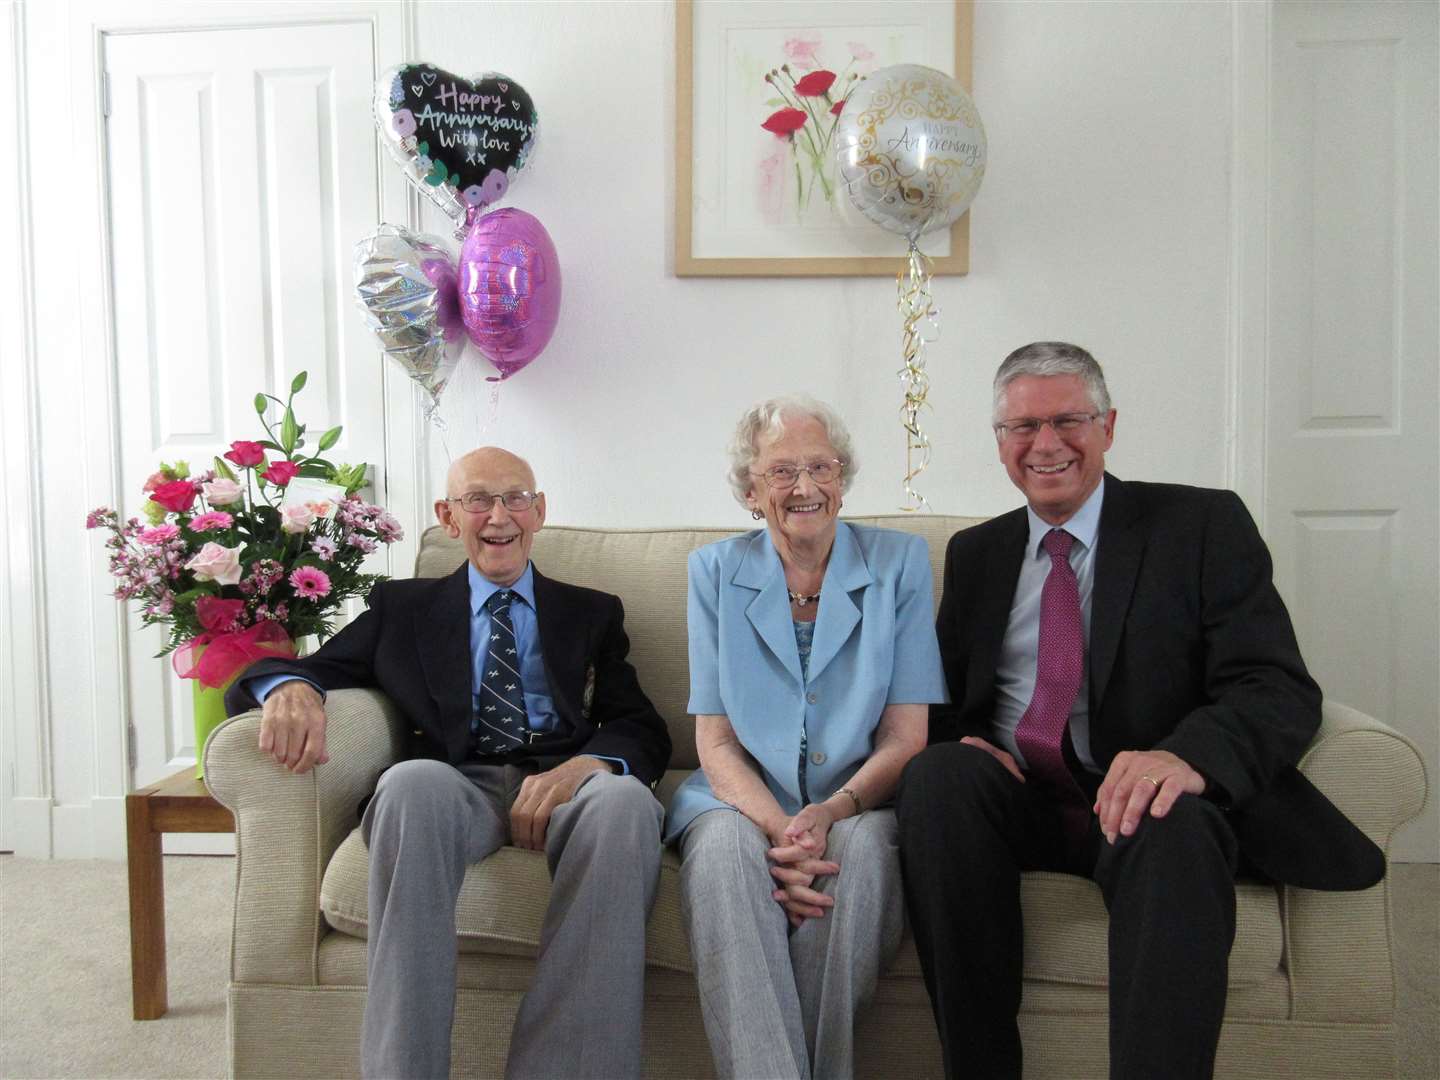 Chrissie and Charlie Murray celebrate their 70th wedding anniversary. They were visited by Lord Lieutenant of Banffshire Andrew Simpson during their special day.